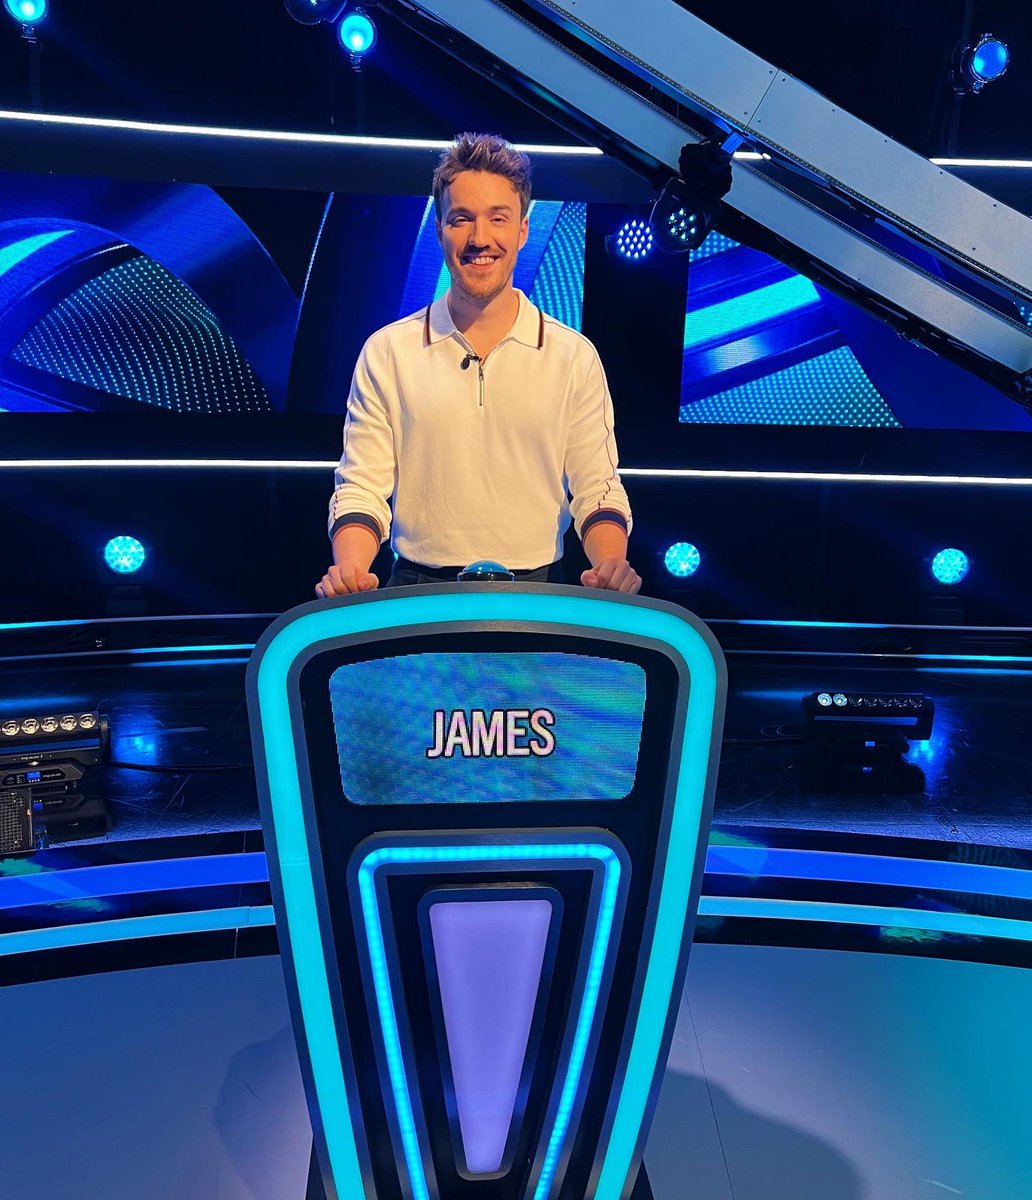 If you’re in need of some Saturday night comedy, I’m on celeb weakest link tonight, 18:15PM on BBC1. Sadly no Man Utd questions, but was alongside a Liverpool legend 😳🔗 #weakestlink